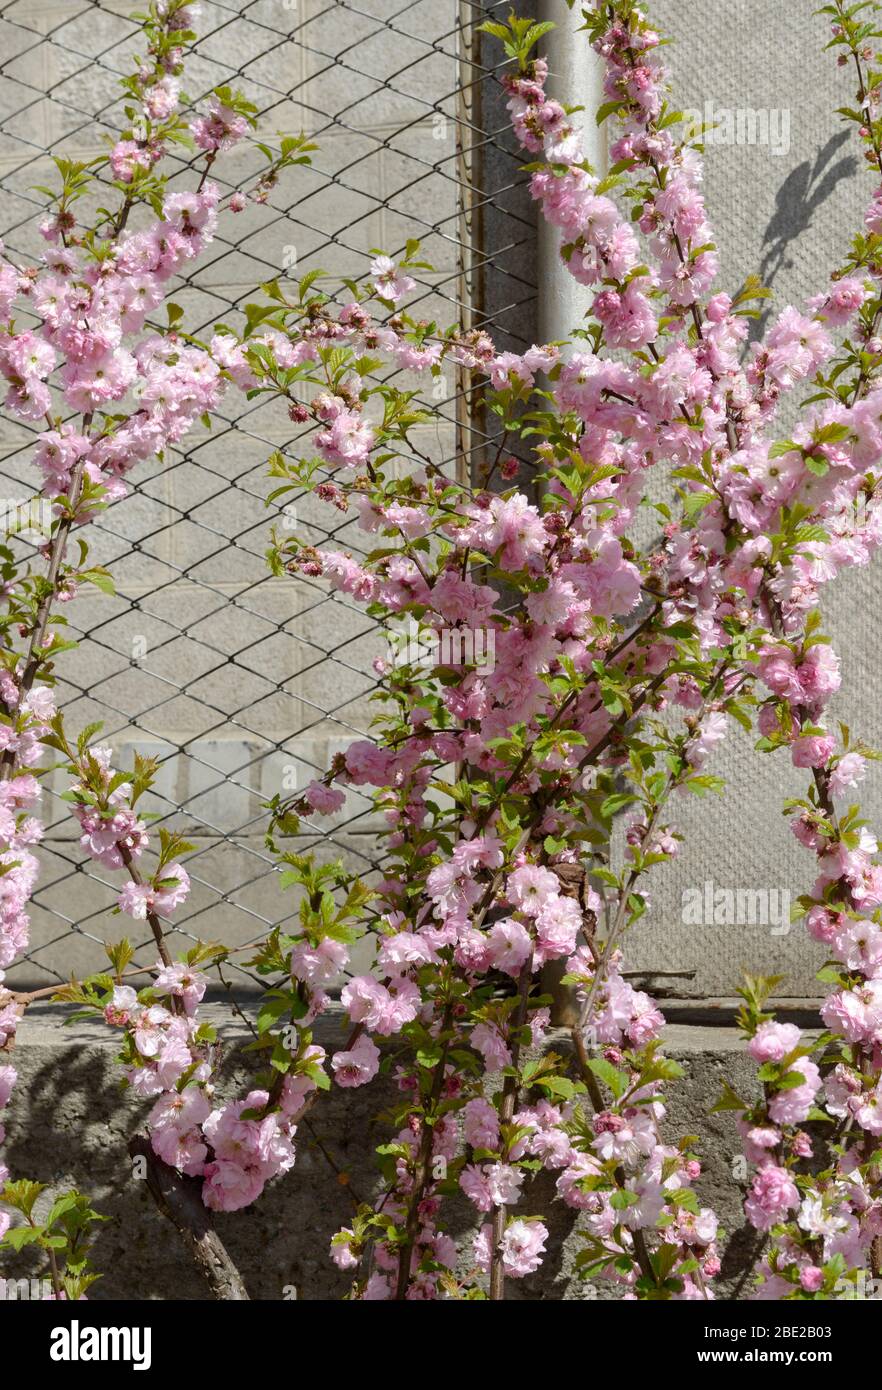 Many bright pink flowers are on twigs of flowering bush of Prunus triloba in spring sunlight. Stock Photo